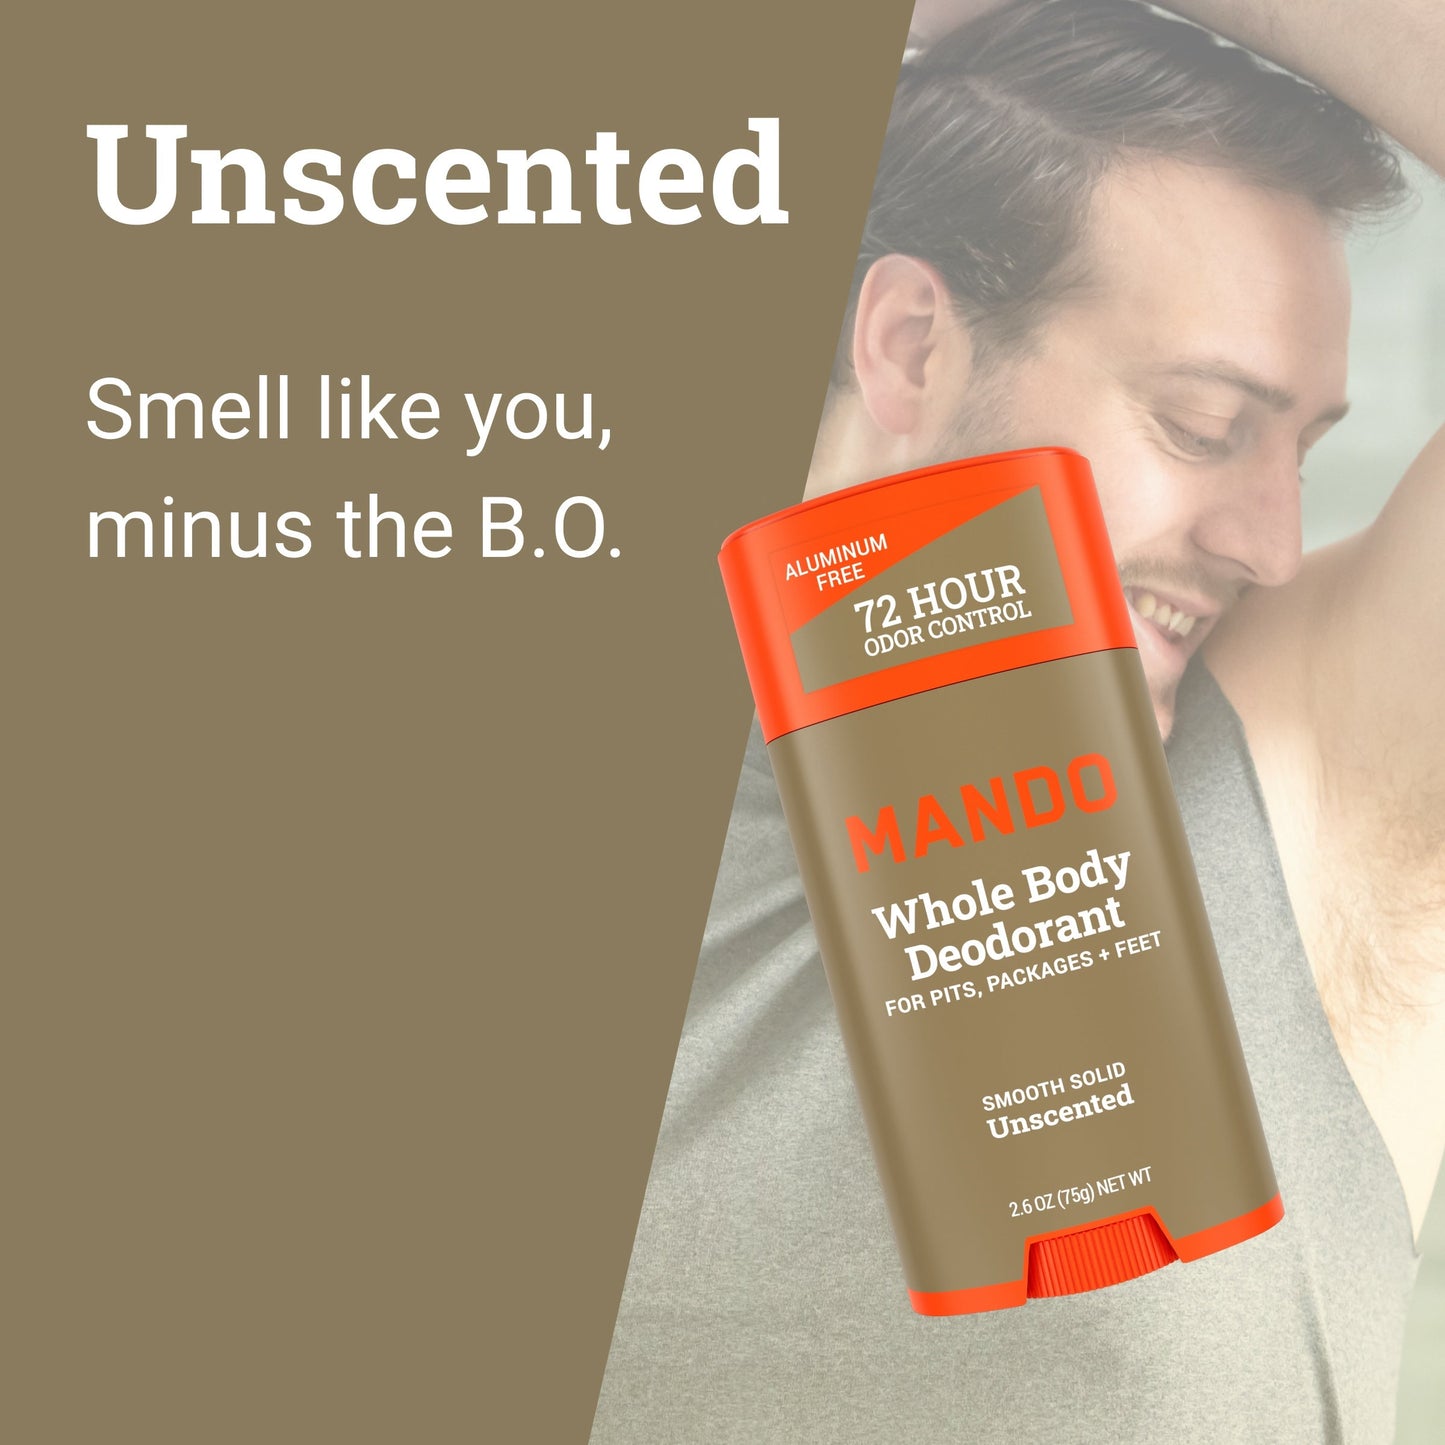 Mando unscented smooth solid deodorant with text: smells like you minus the B.O